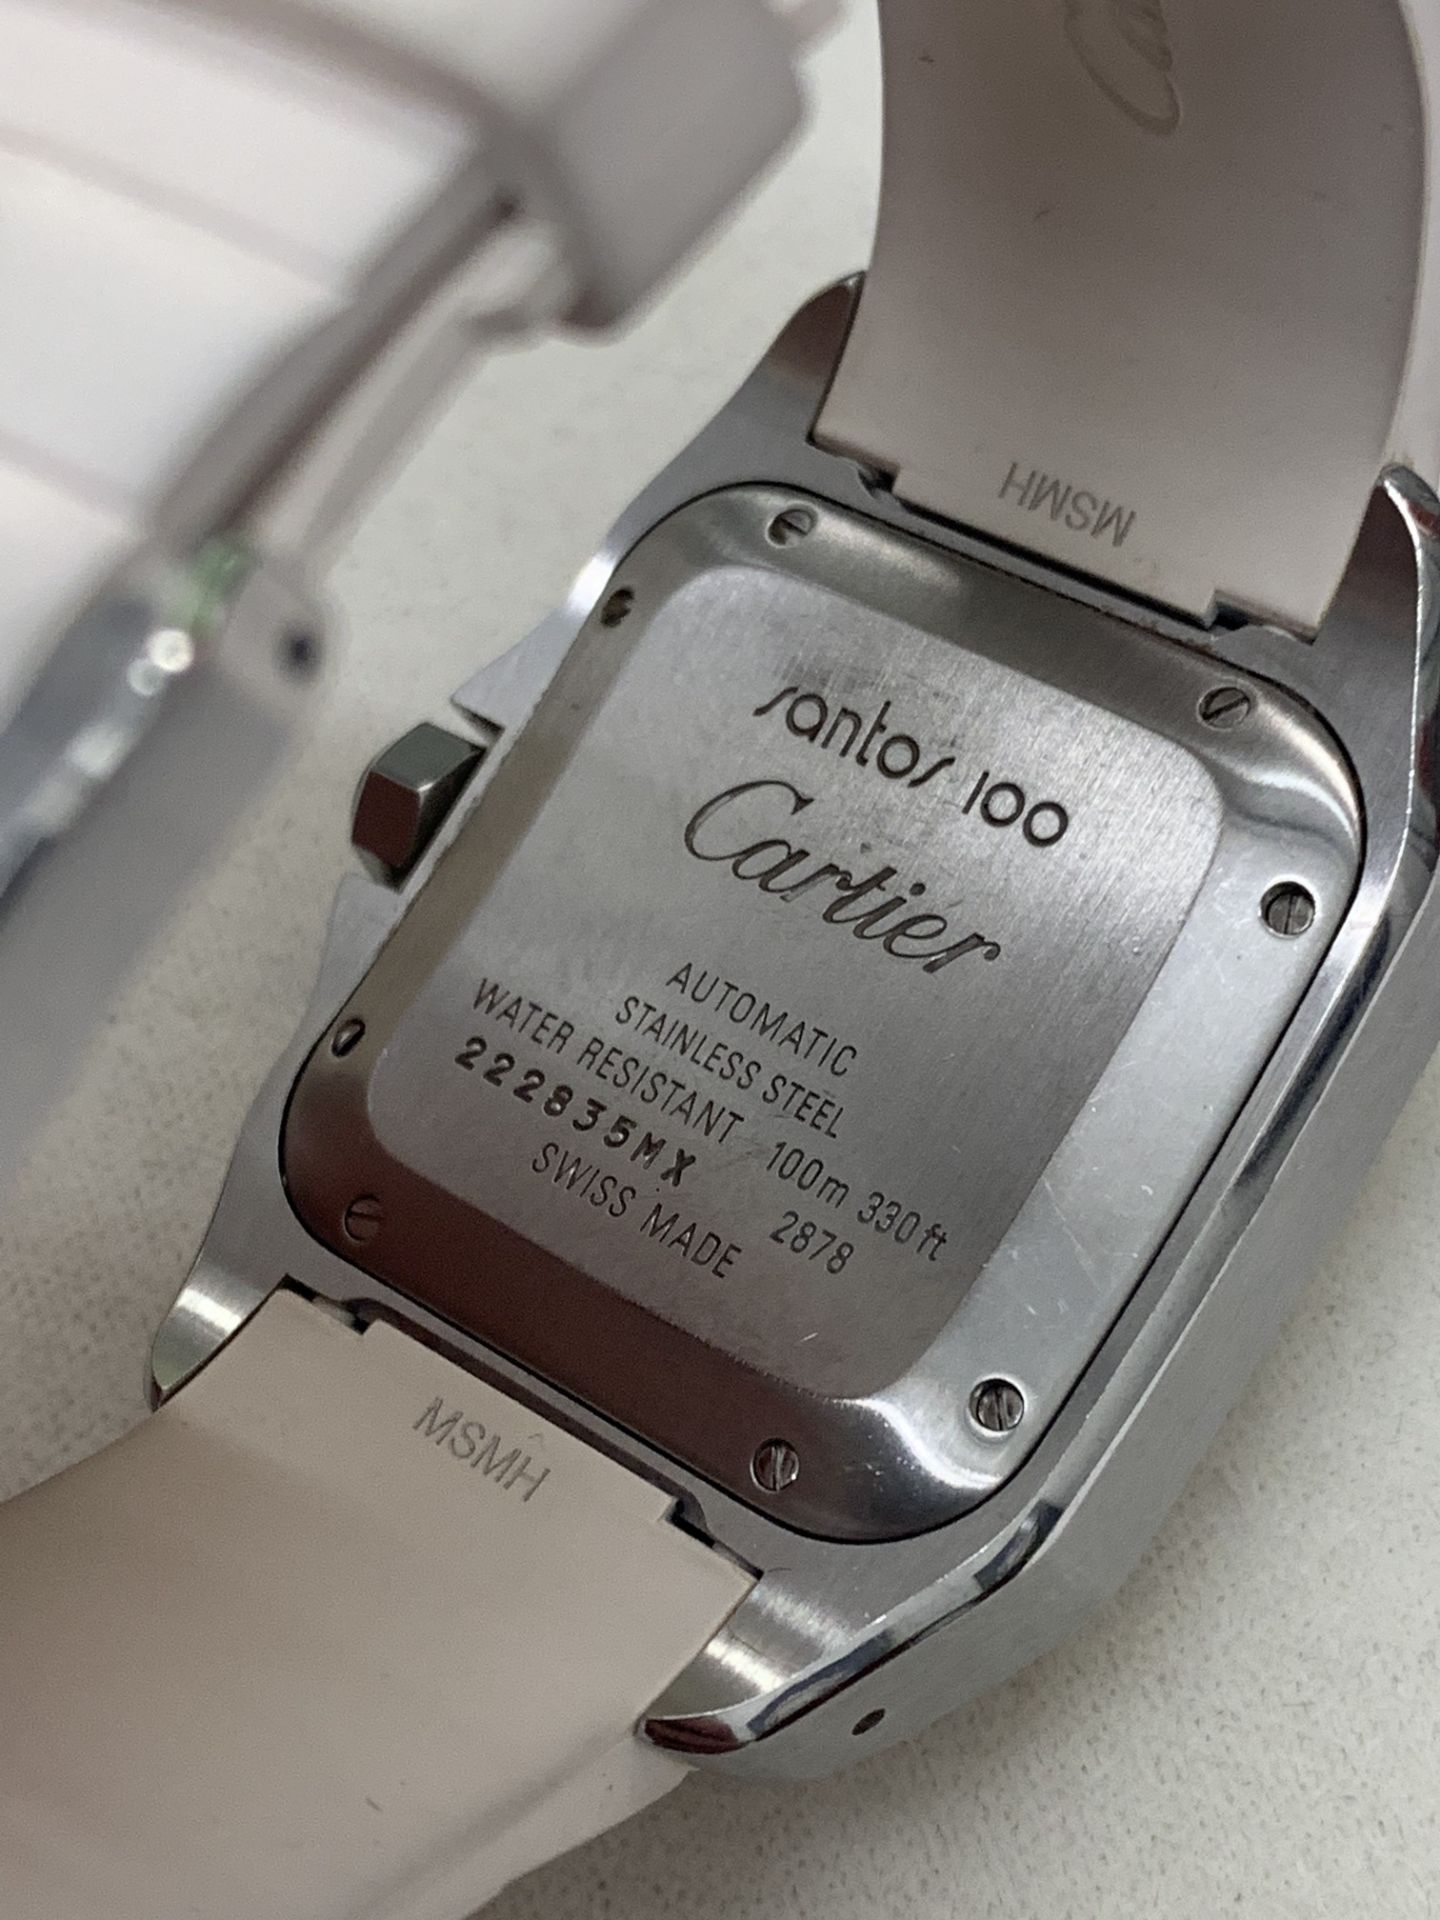 CARTIER SANTOS 100 AUTOMATIC WATCH 33mm - Image 7 of 7